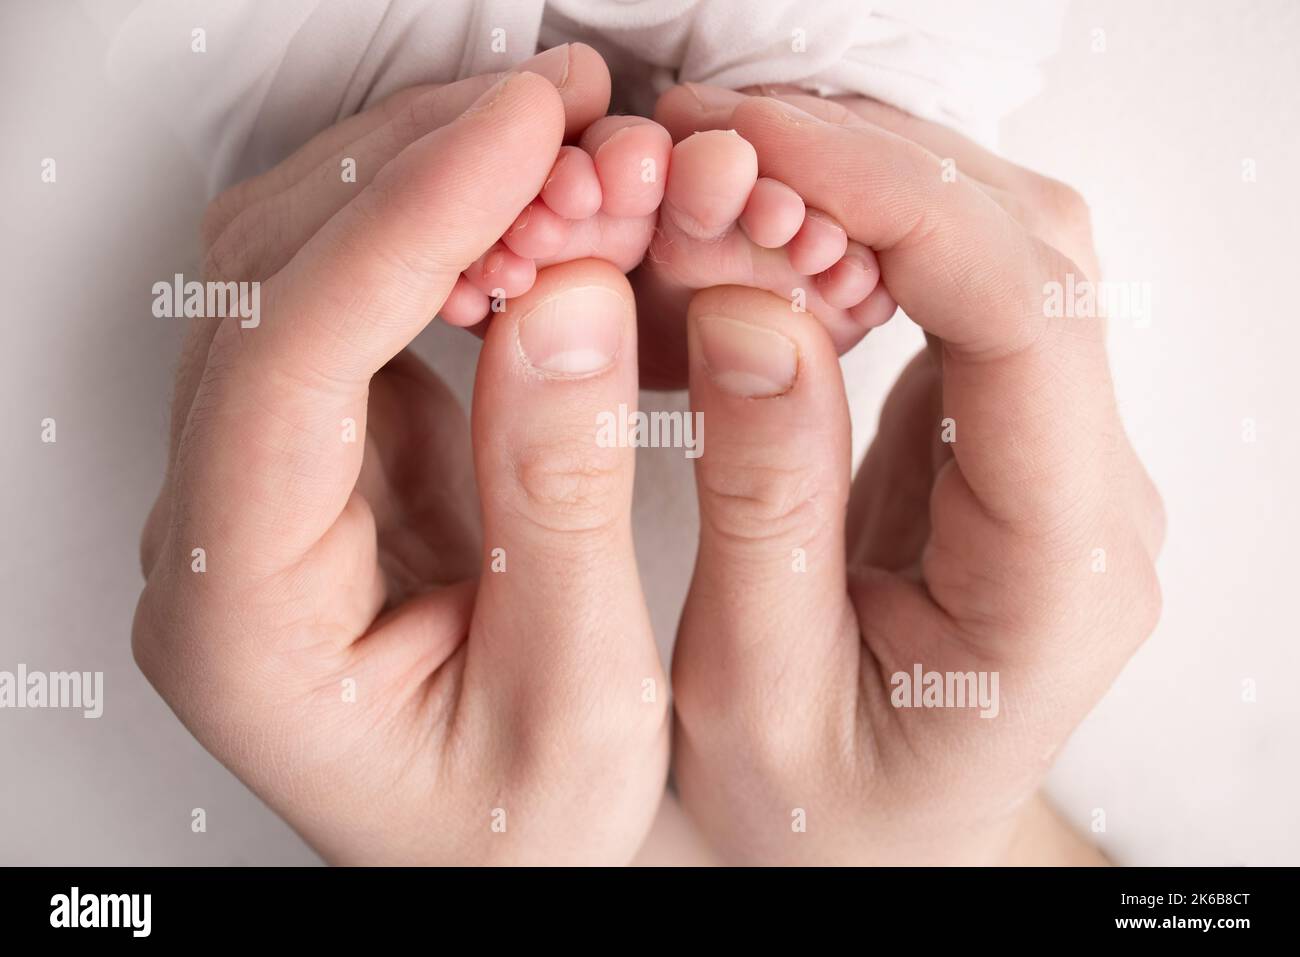 Mother is doing massage on her baby foot. Closeup baby feet in mother hands. Stock Photo